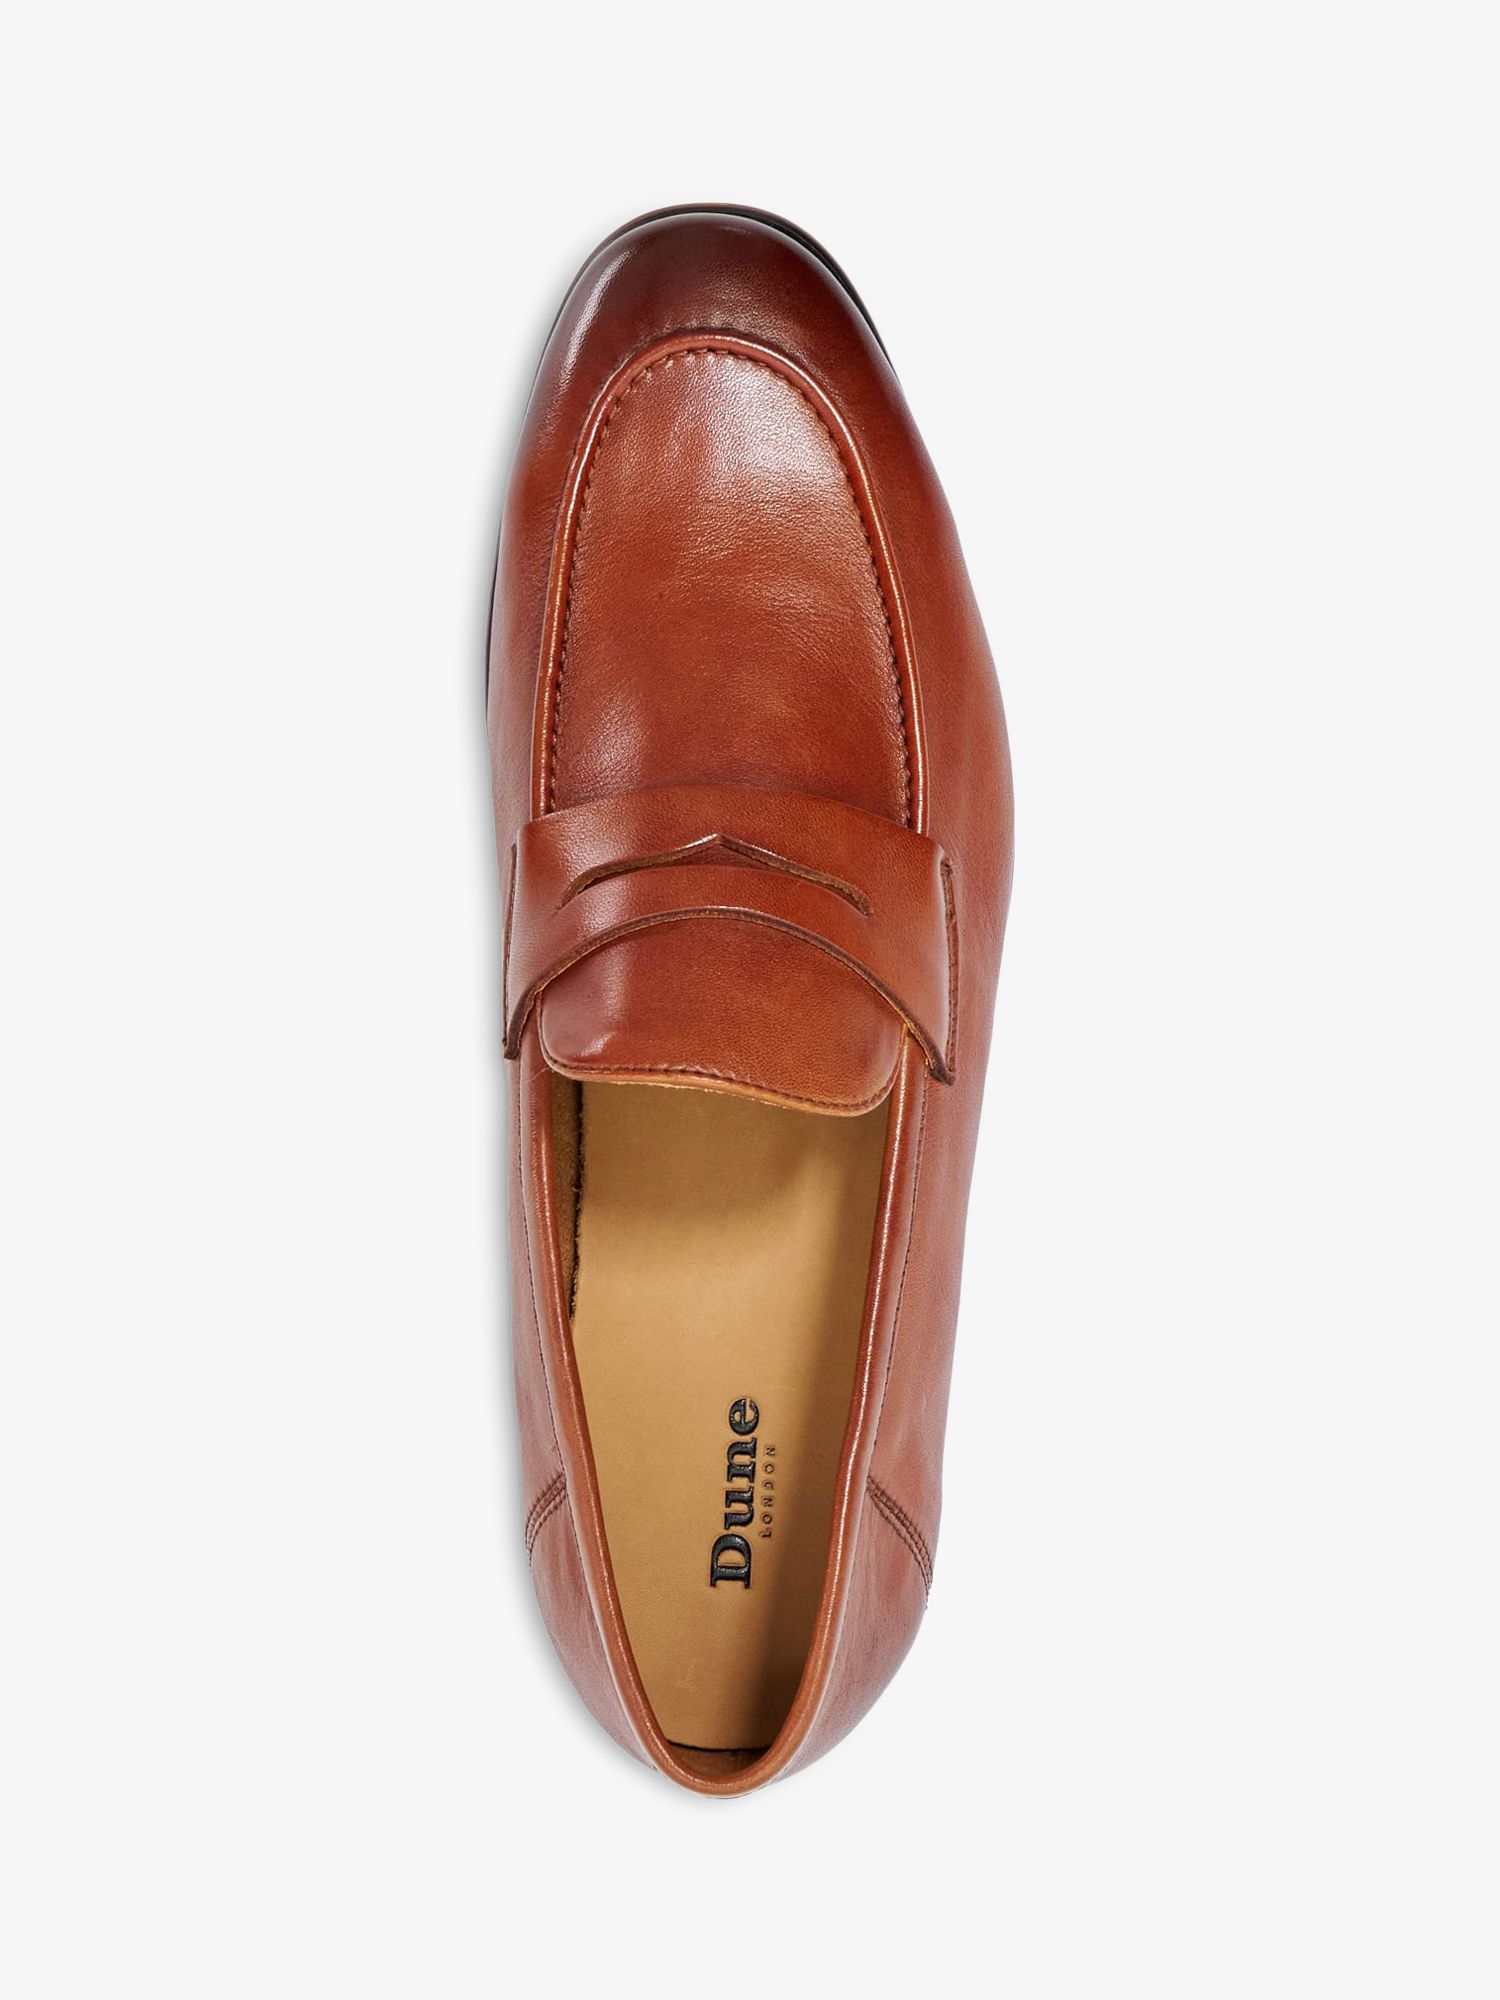 Buy Dune Strategic Leather Crush Back Loafers, Tan Online at johnlewis.com